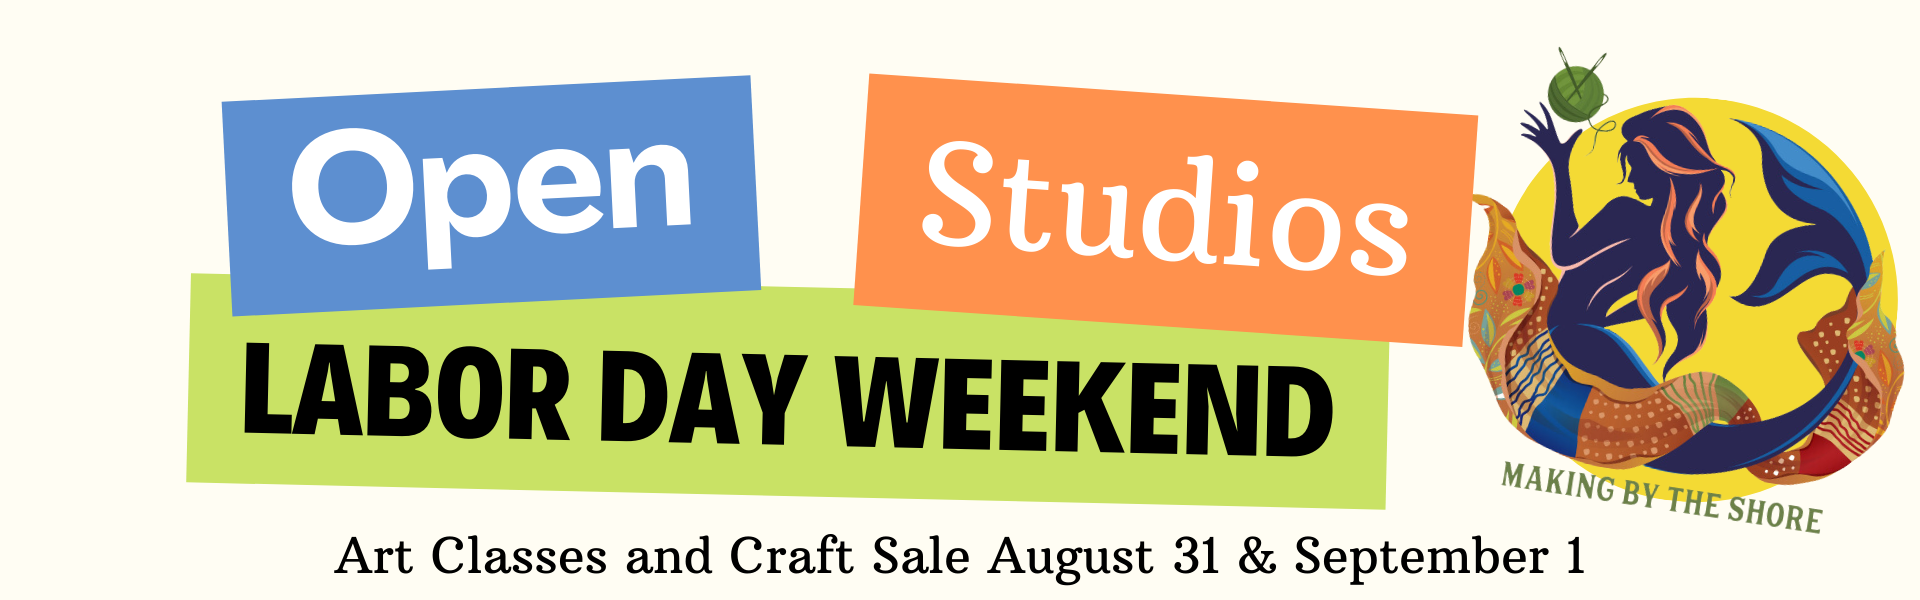 Open Studio at Searsport Shores Labor Day Weekend Banner